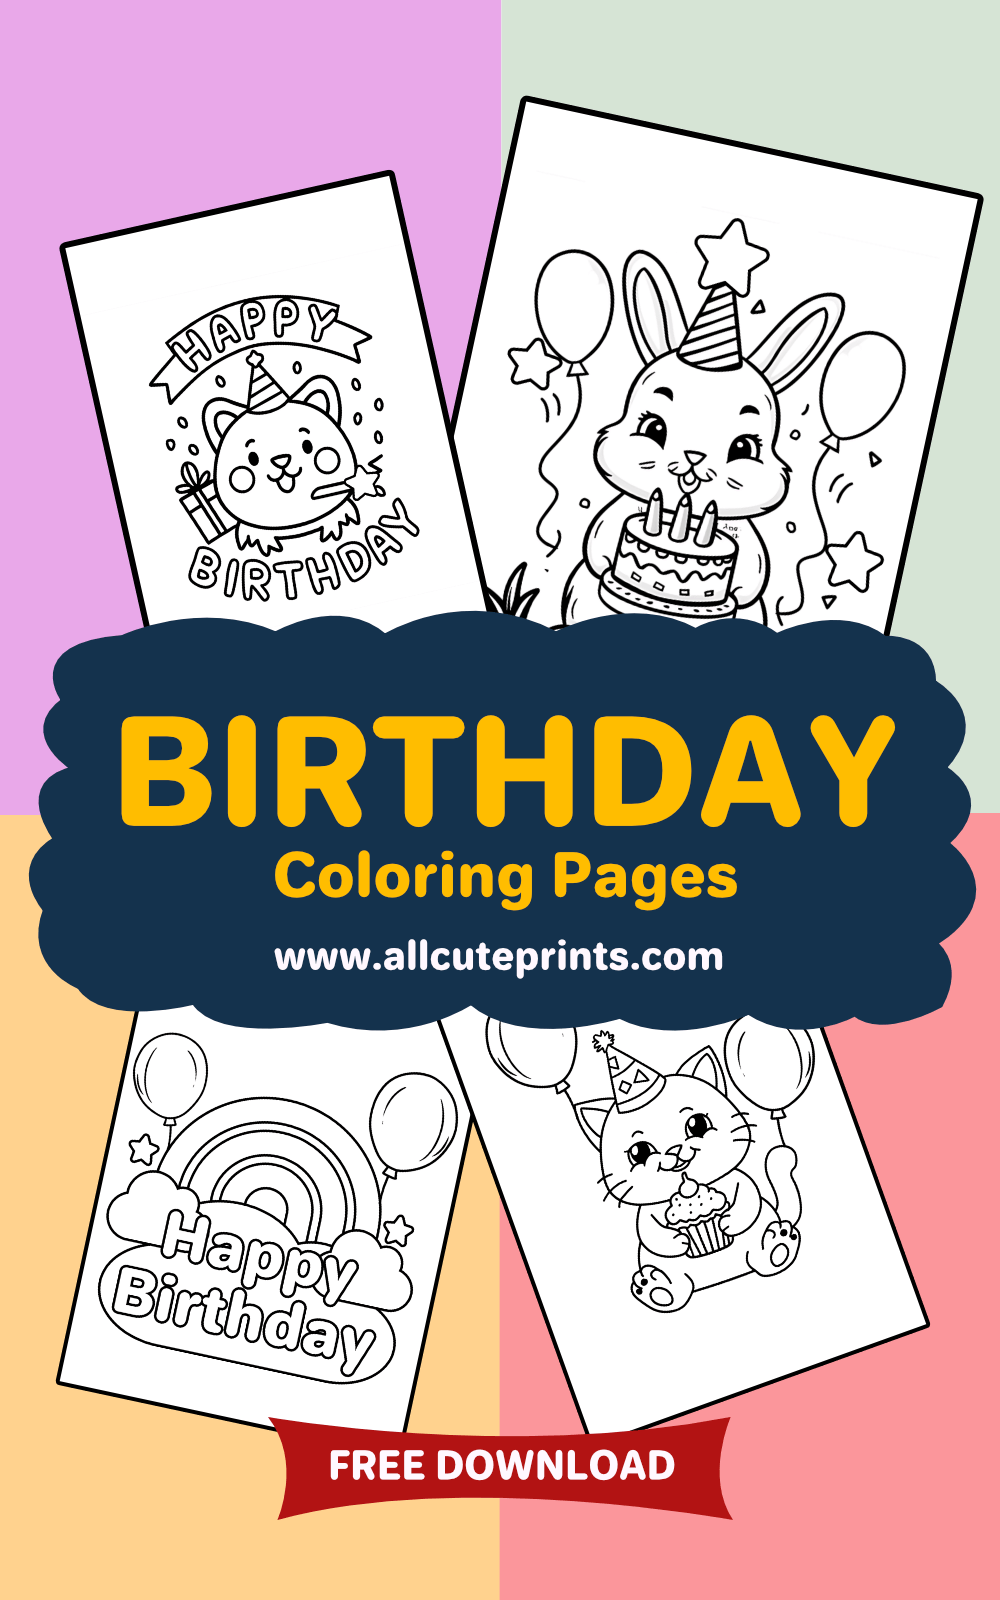 birthday-coloring-pages-sheets-download-free